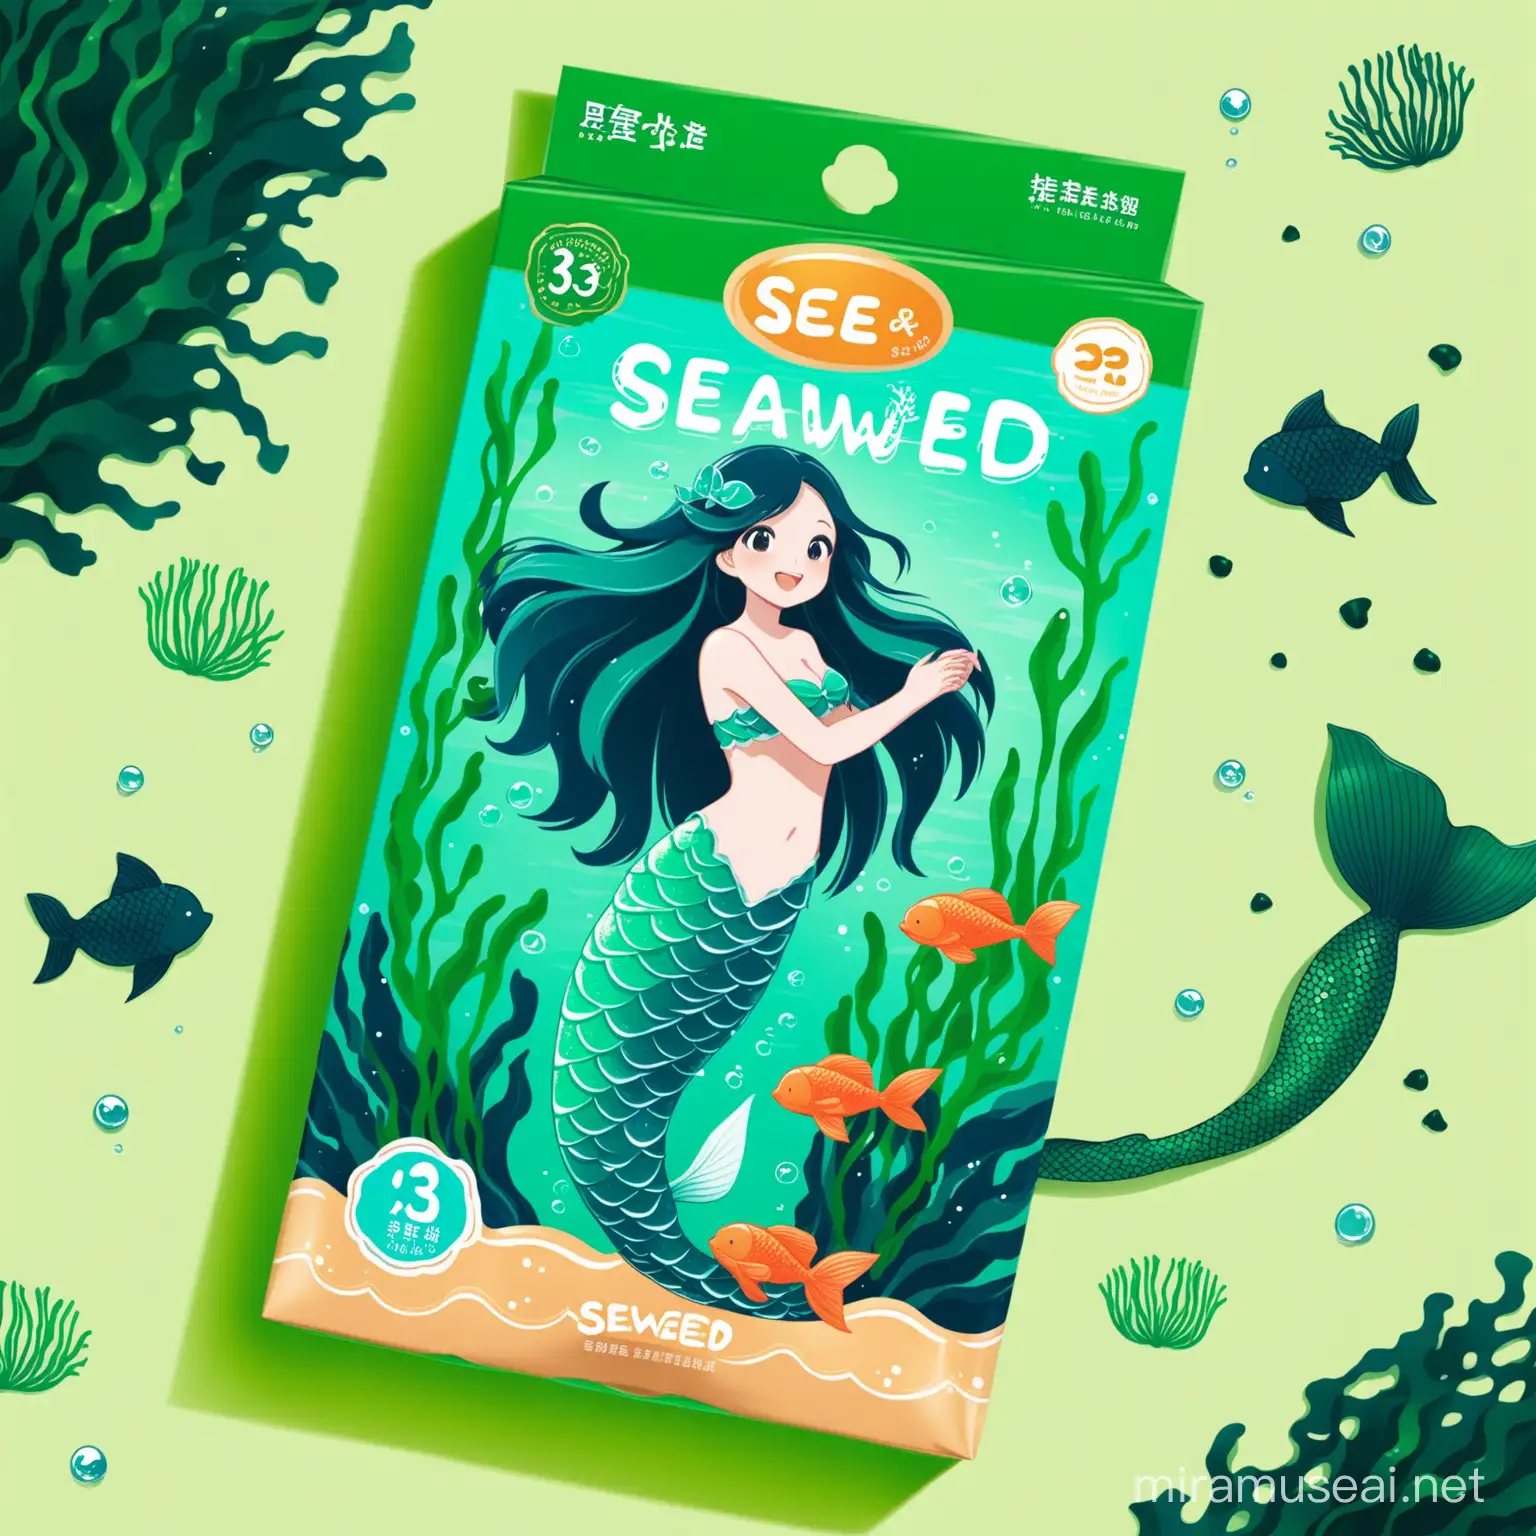 Food Packaging Design with Seaweed and Mermaid Accents